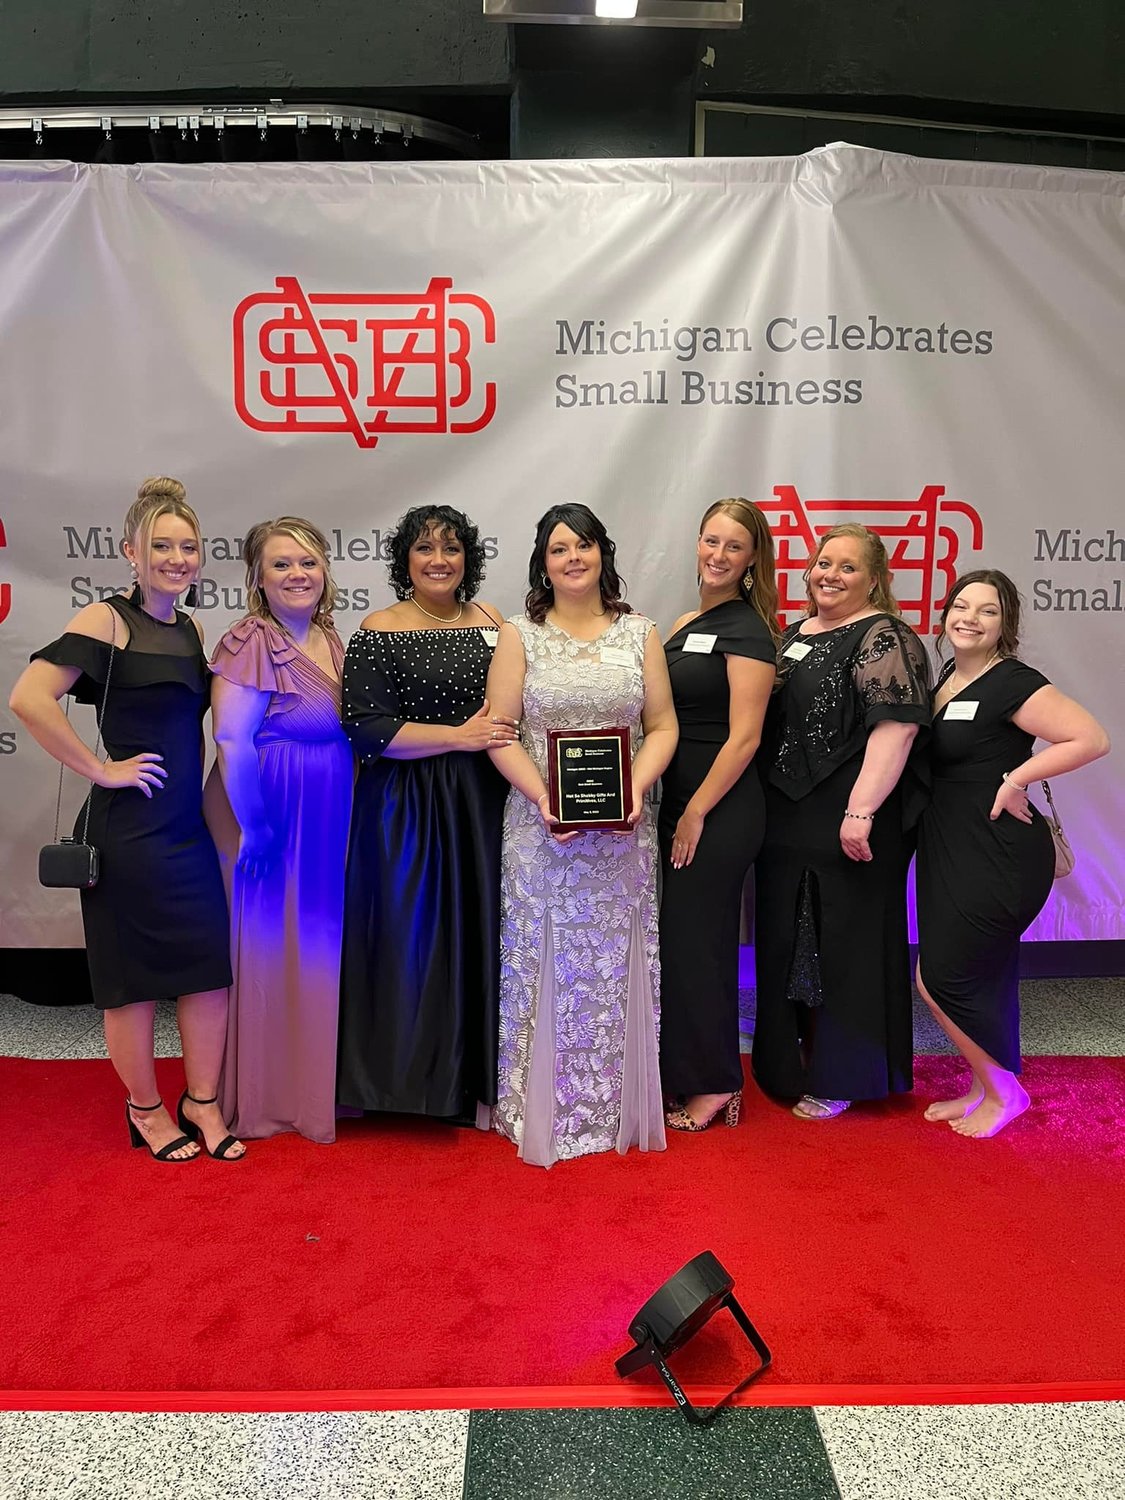 All of Erica Yost’s personnel and many family members attended the Michigan Celebrates Small Business Gala in Lansing ceremony. Pictured, from left, are Aja Heber, Madi LaTulip, Lindsay Heber, Erica Yost, Aliona Heber Leslie Hamilton and Kenzie Farison.